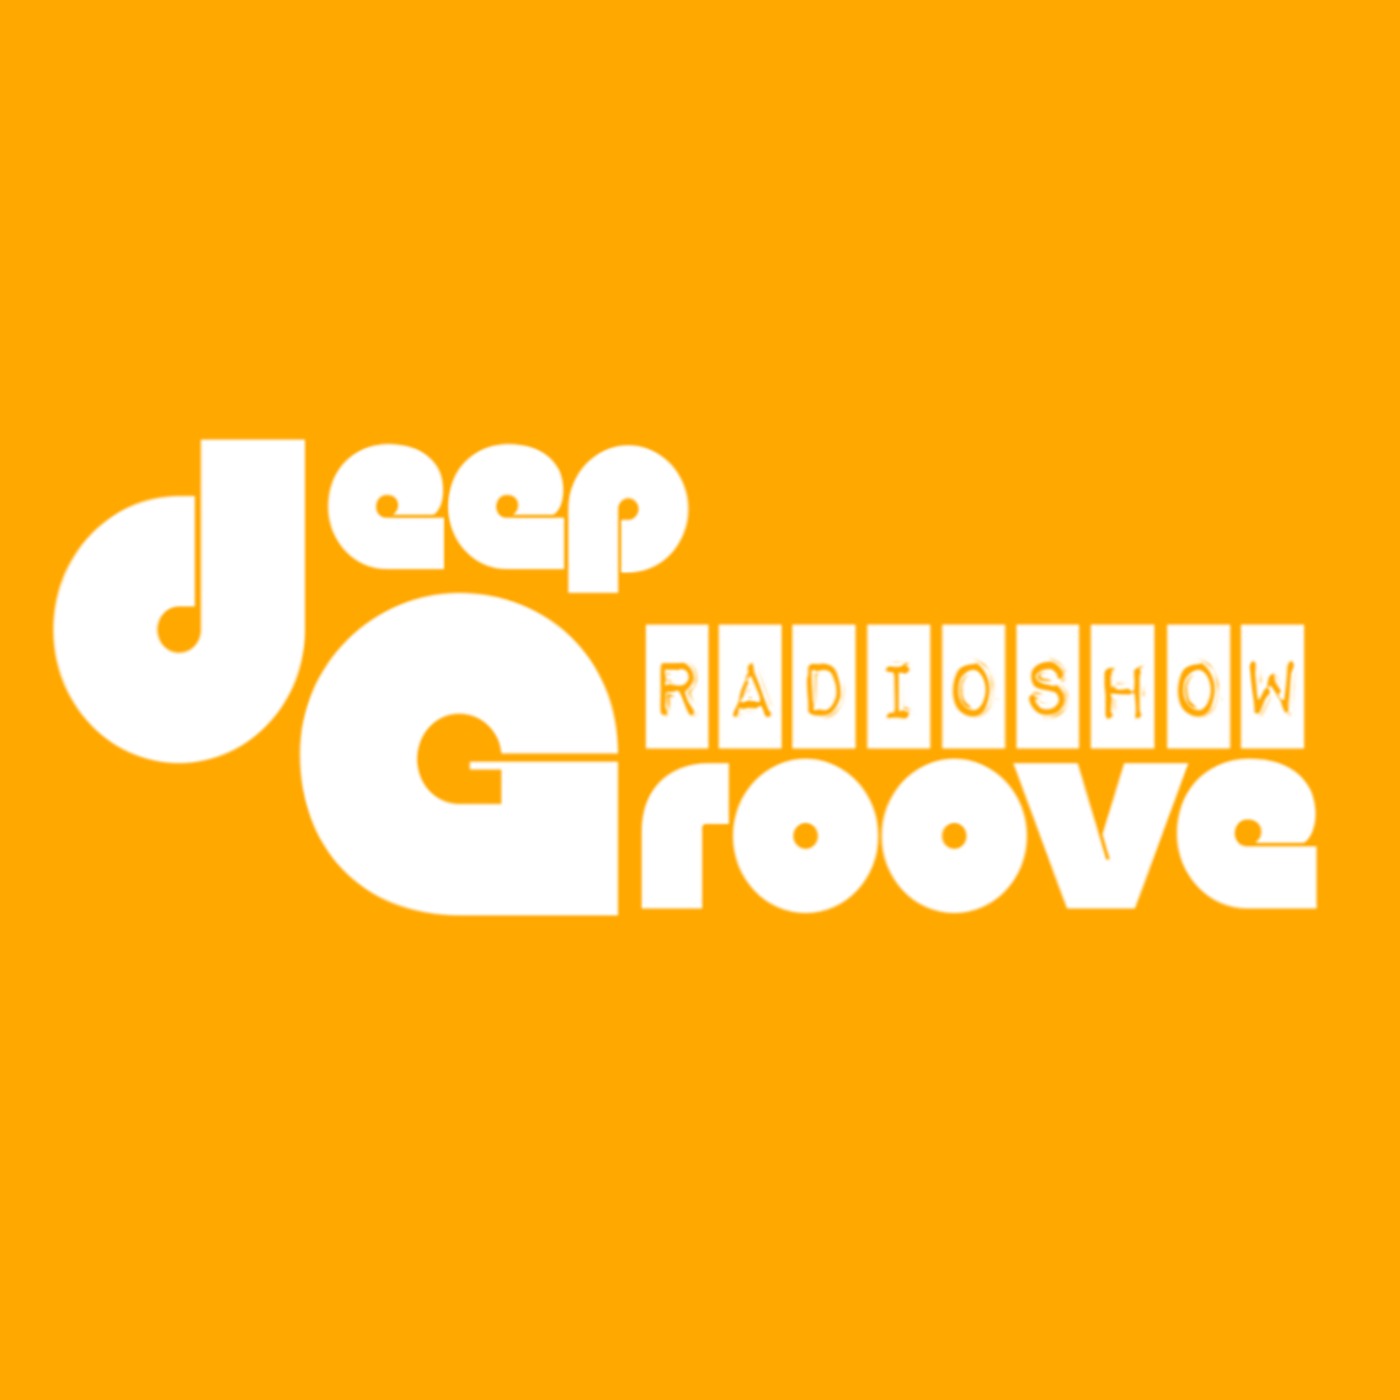 deepGroove Show by Martin Kay (Official)